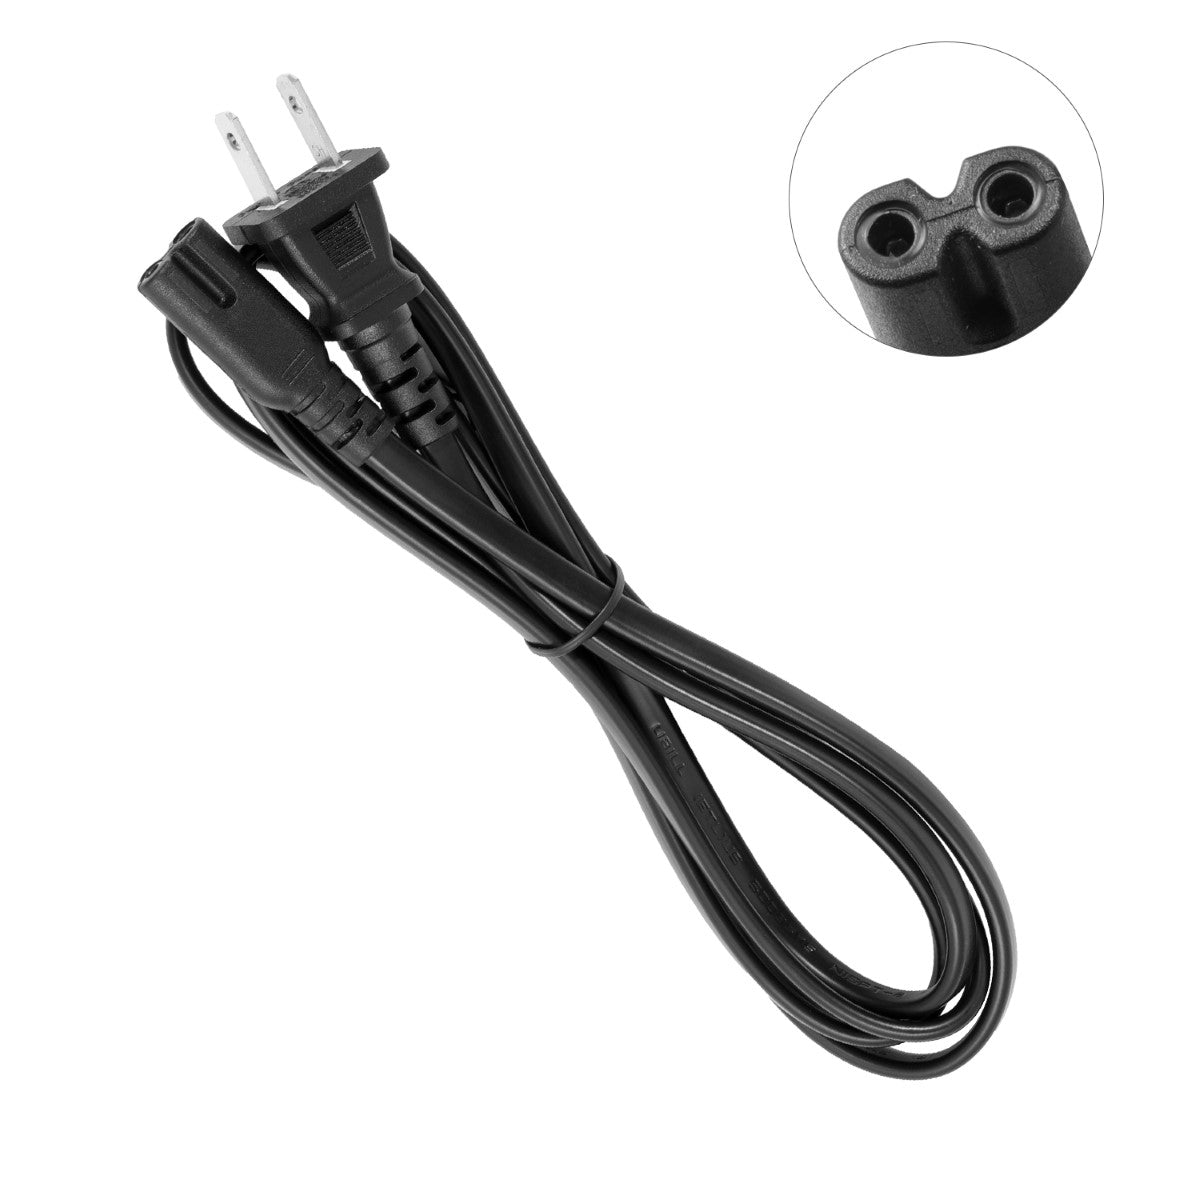 Power Cord for HP ENVY 110 D411c e-All-in-One Printer.